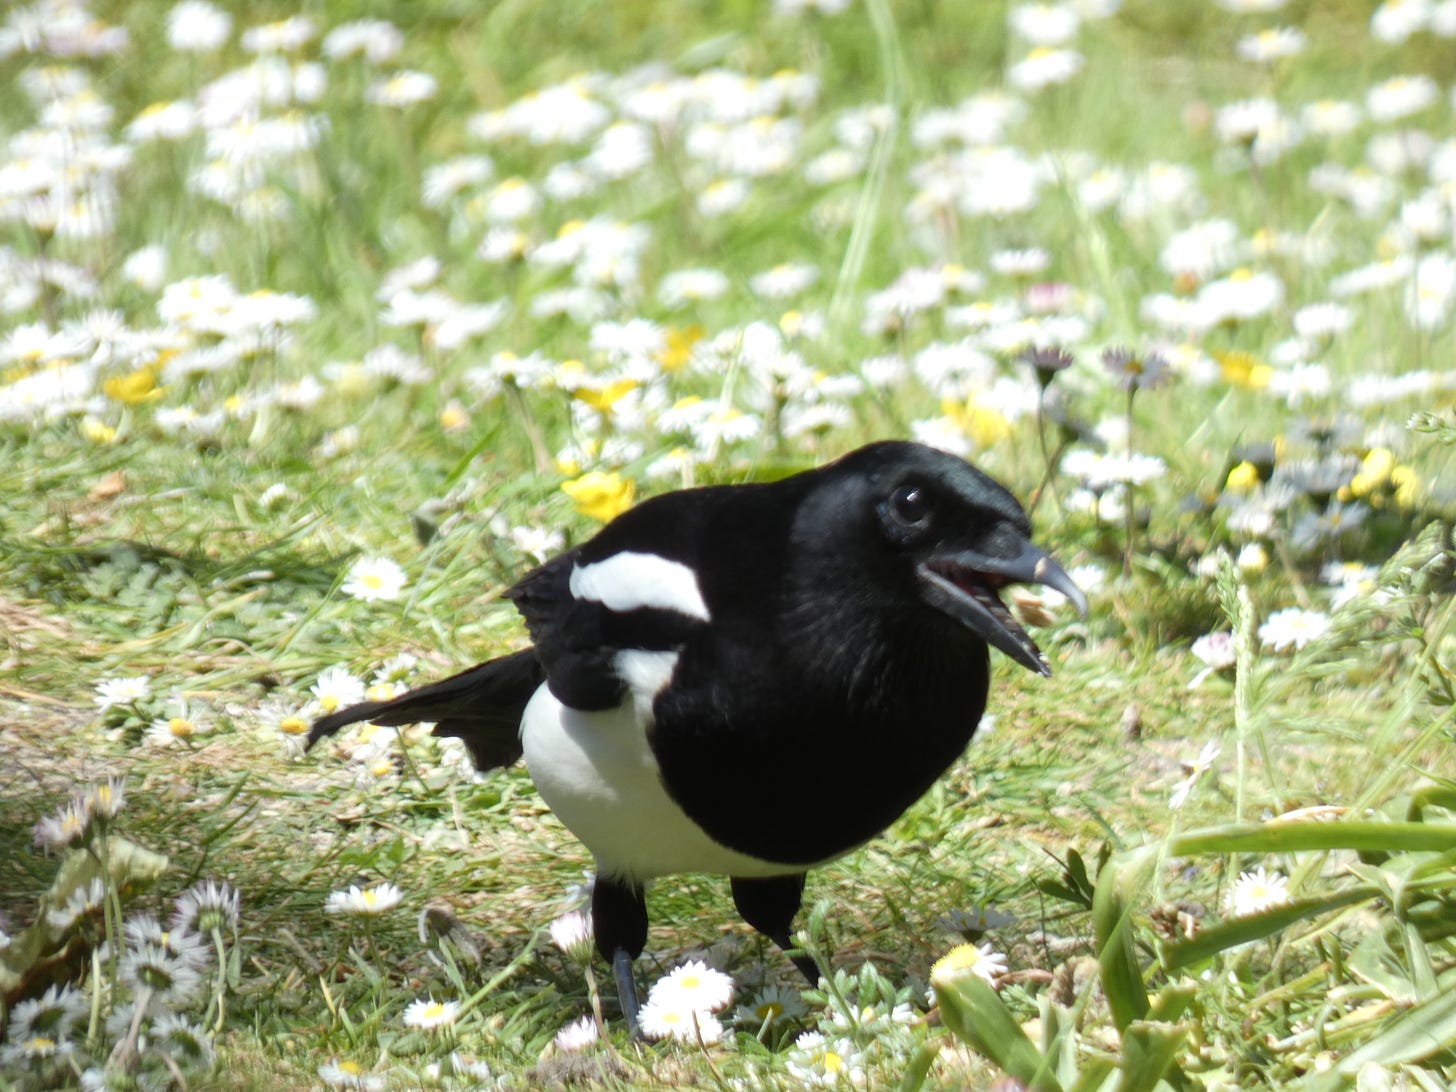 an image of a magpie eating a seed